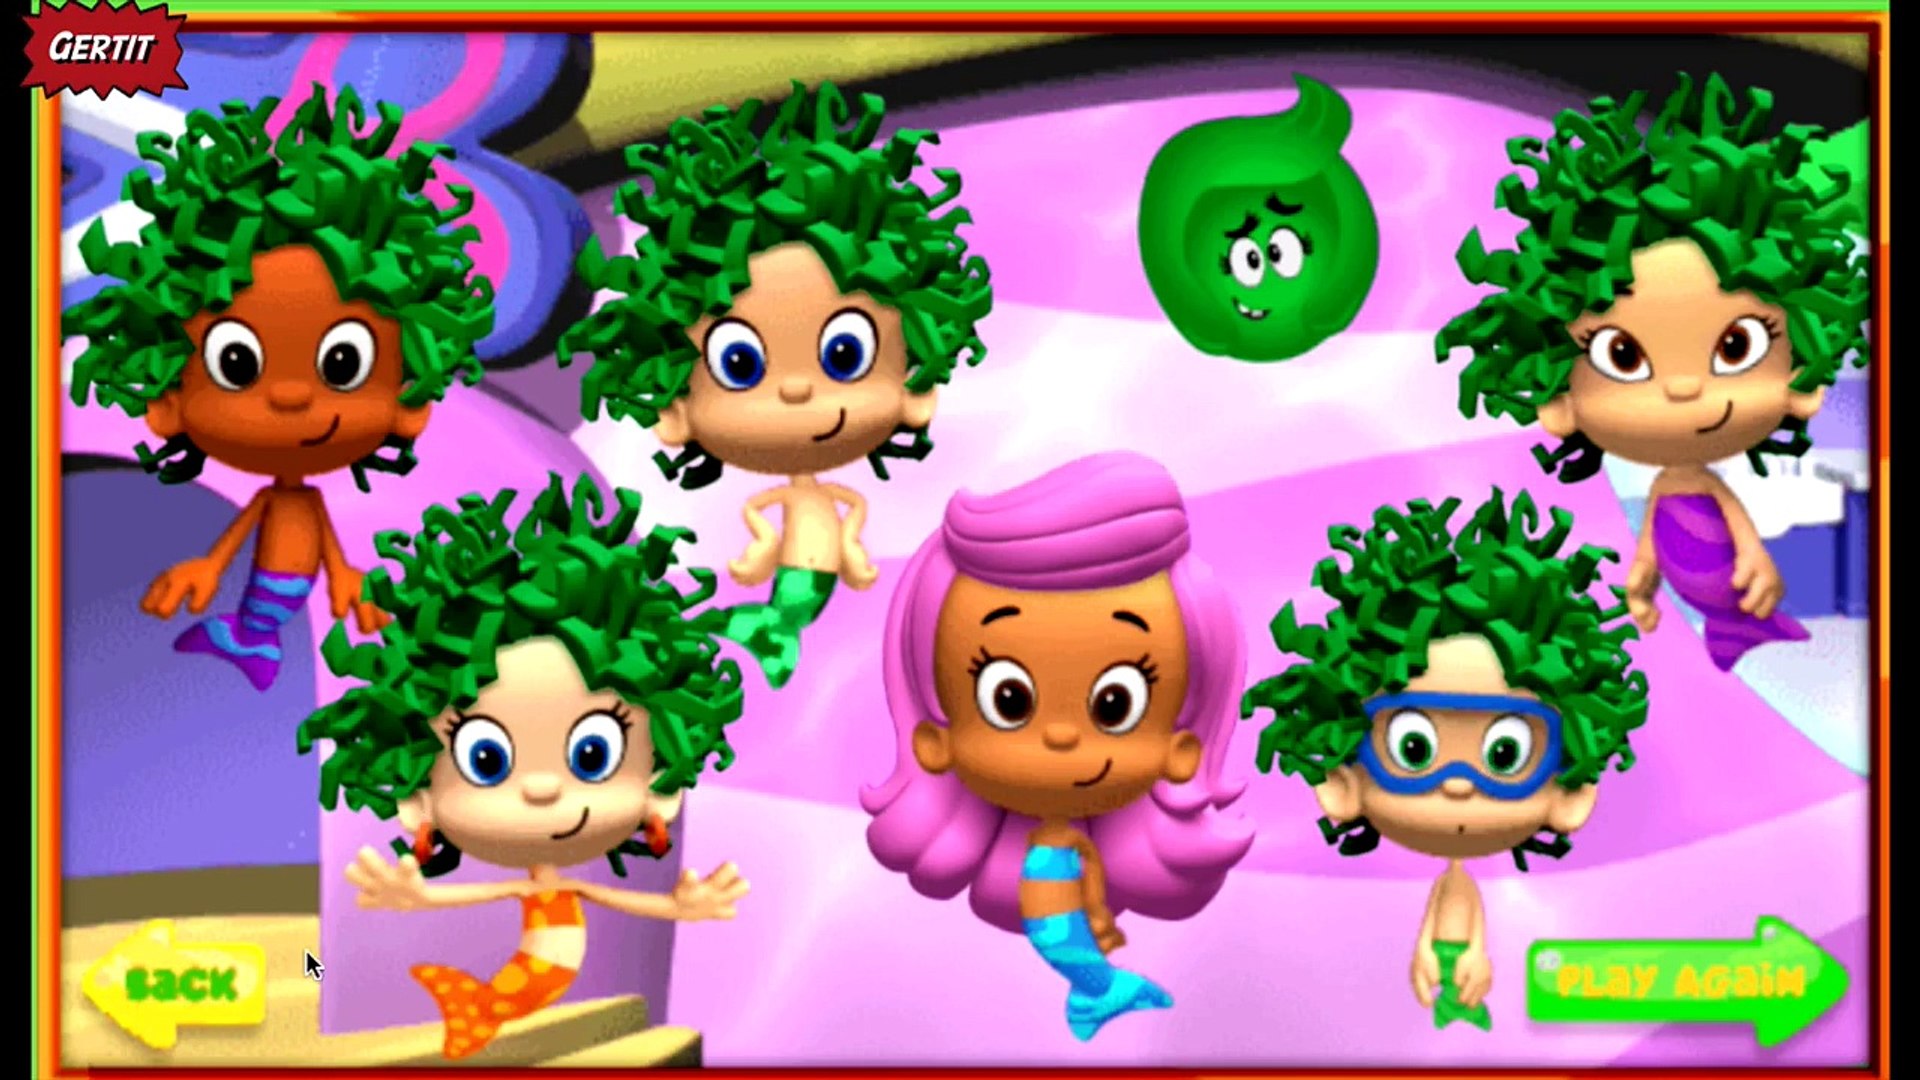 Bubble Guppies: Good Hair Day for Kids - Haircut Full English Game For Kids  Nick Jr. By GERTIT – Видео Dailymotion